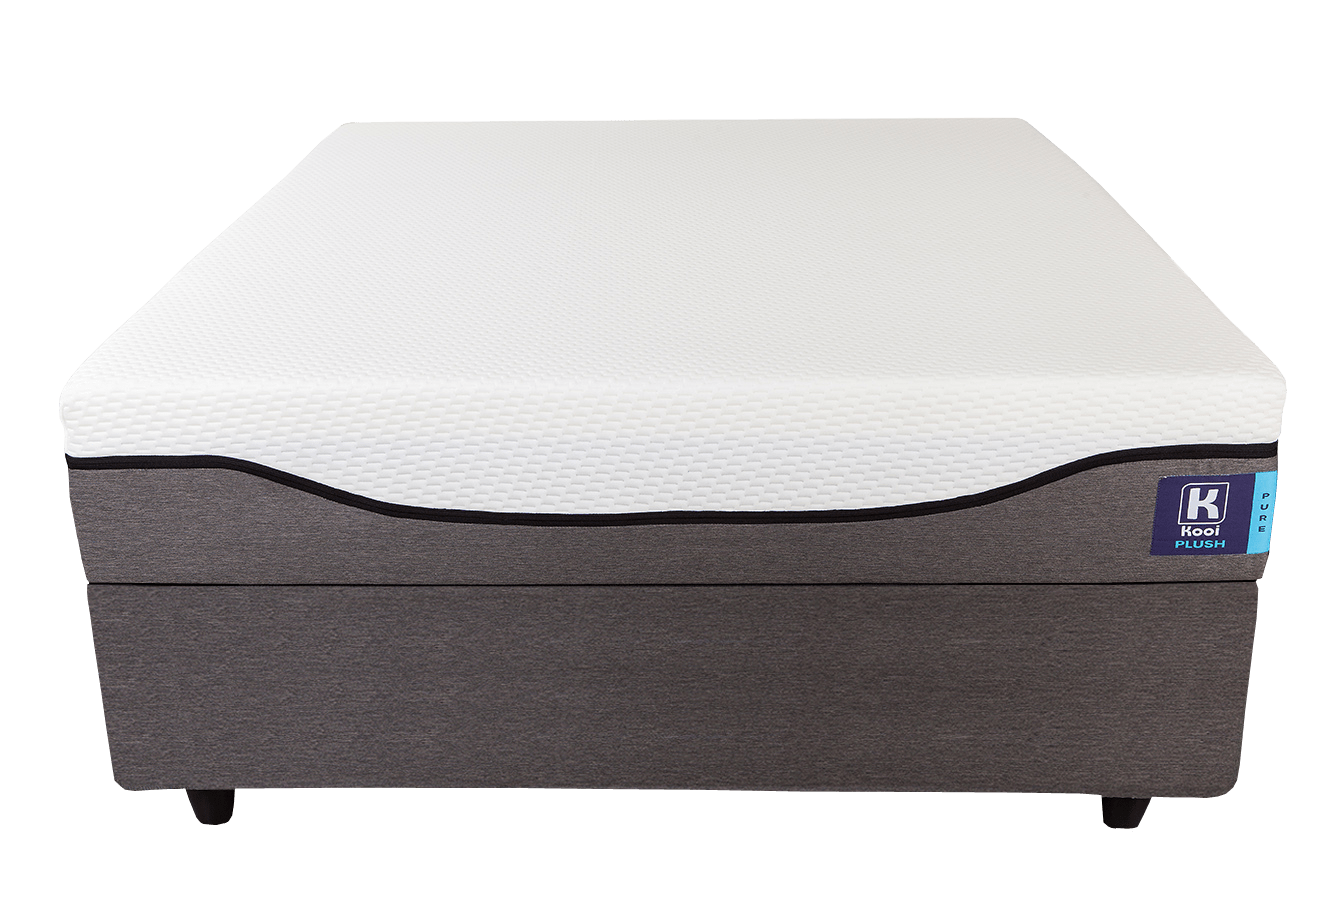 are plush top mattresses bad for kids